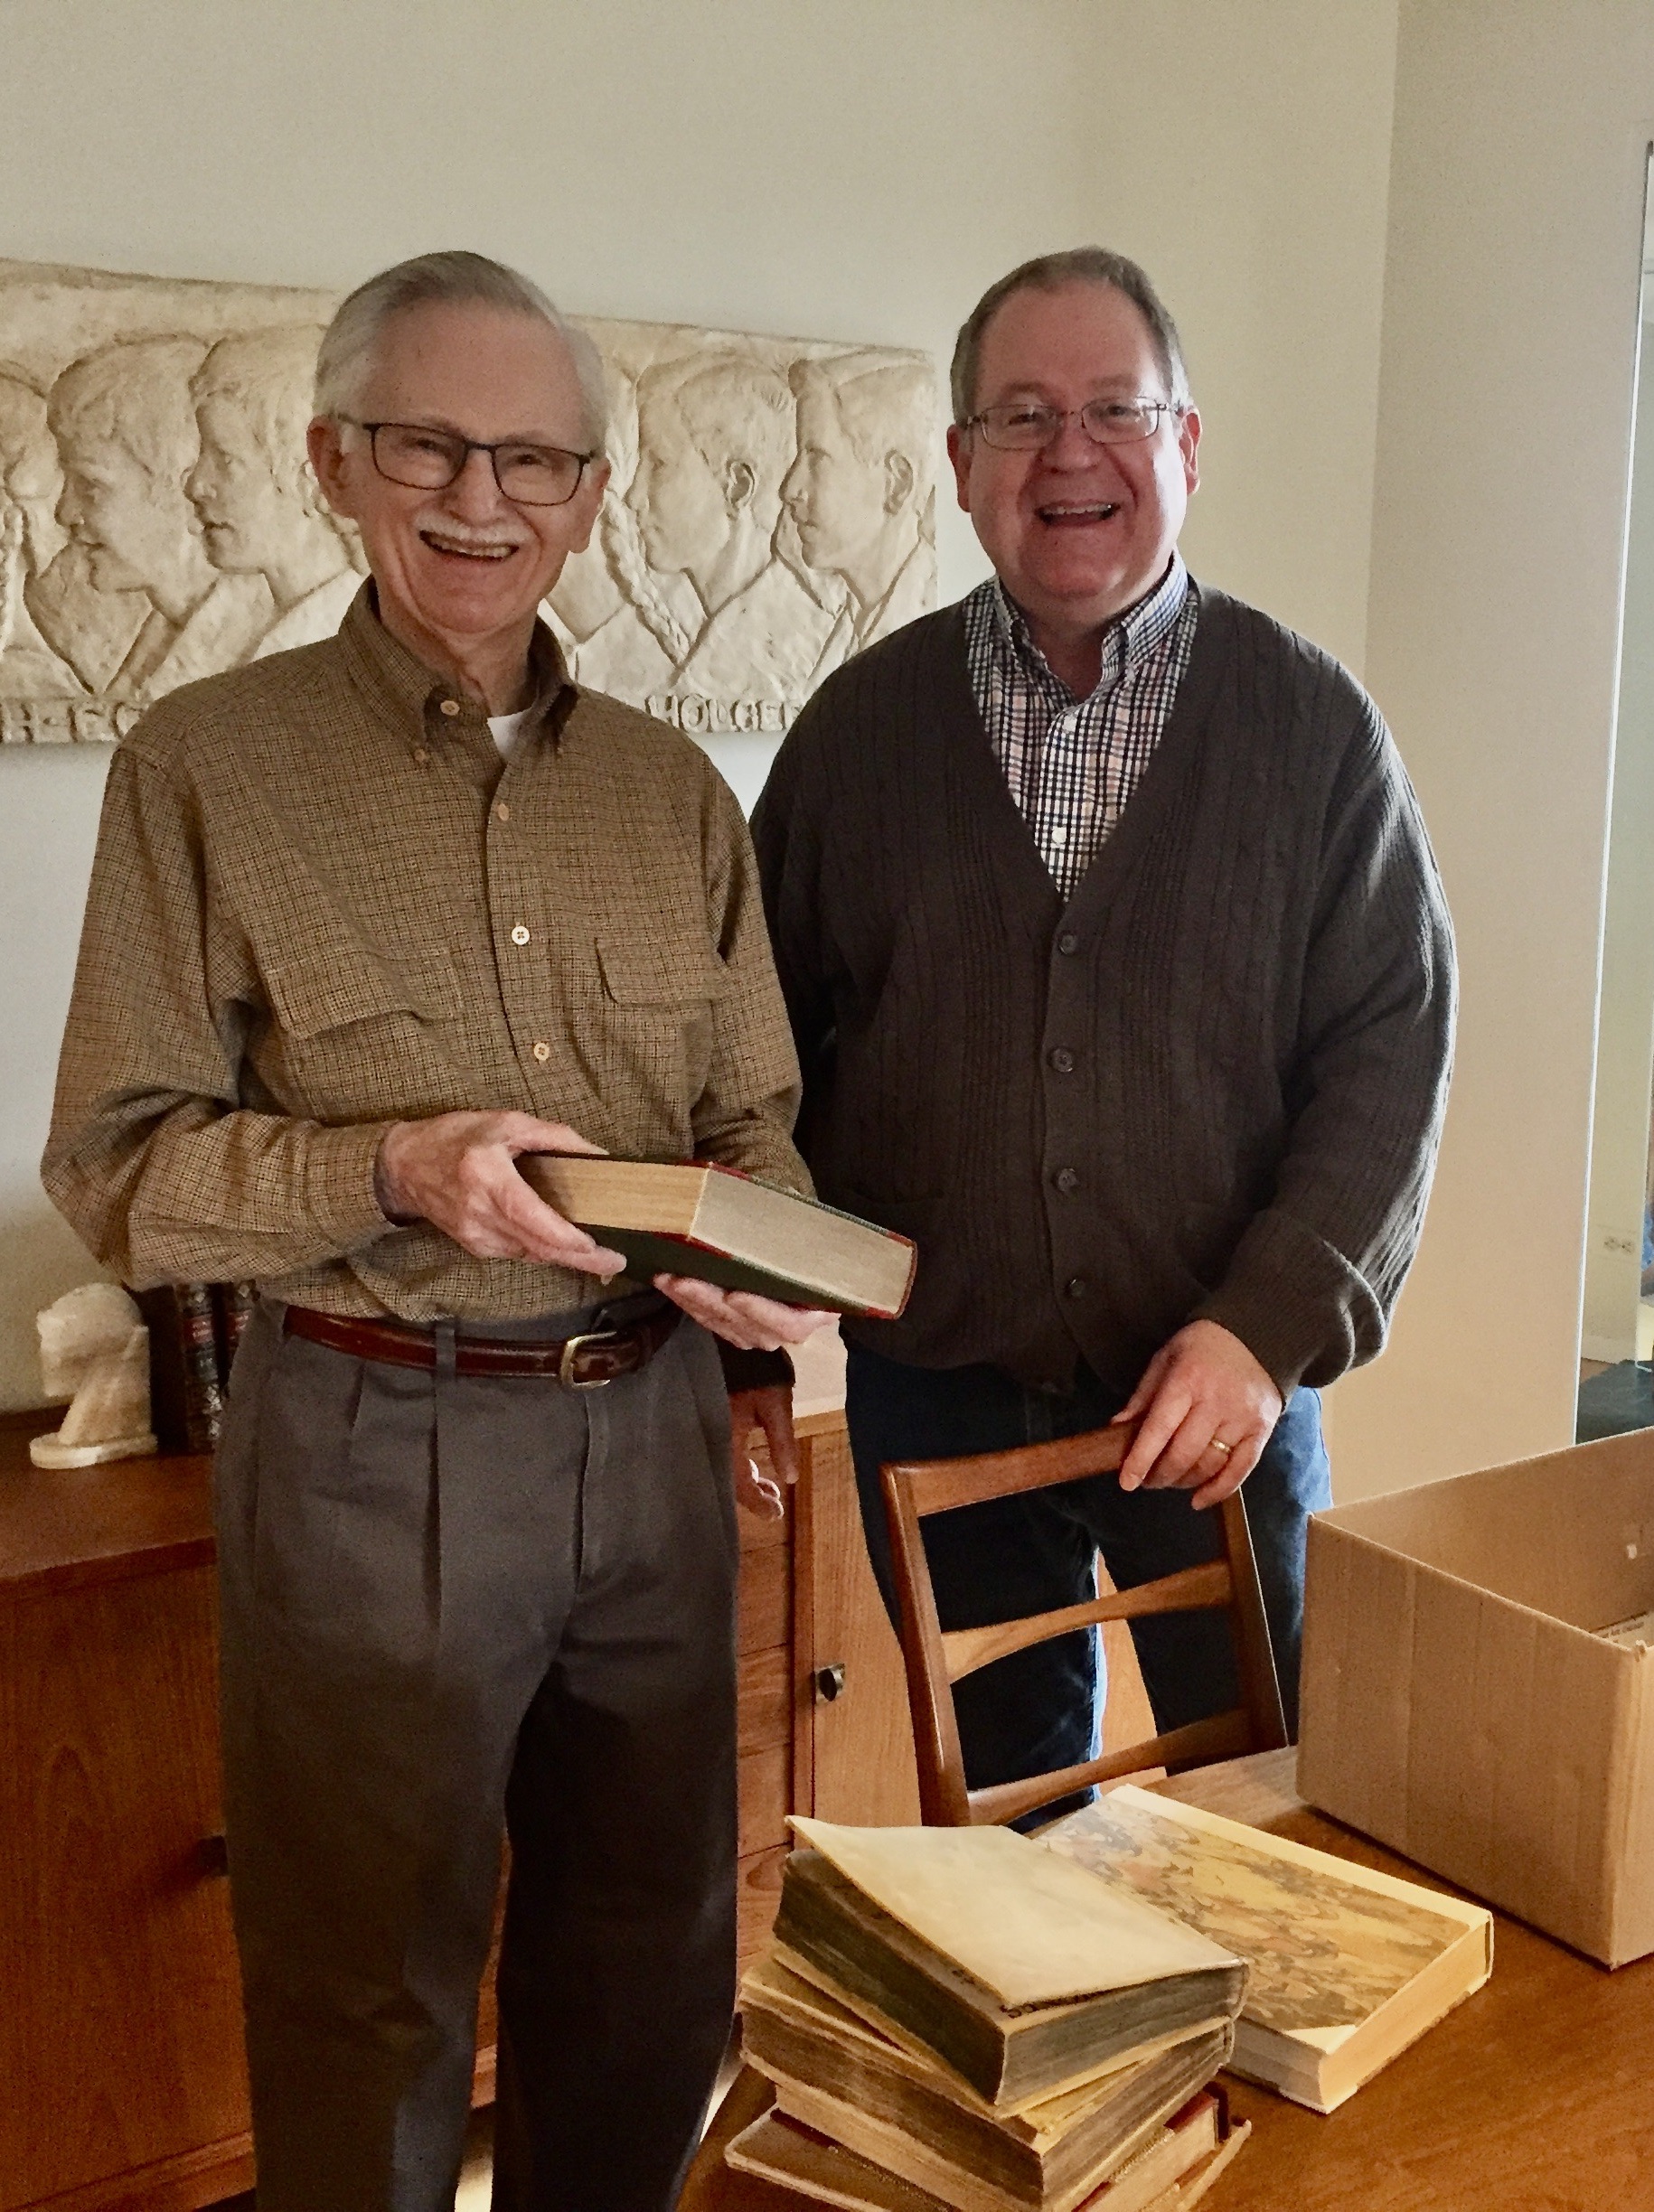 John Christianson (left), at his home in Minneapolis on March 30, 2022, showing Curator Kerry Magruder (right) some of the books being donated.